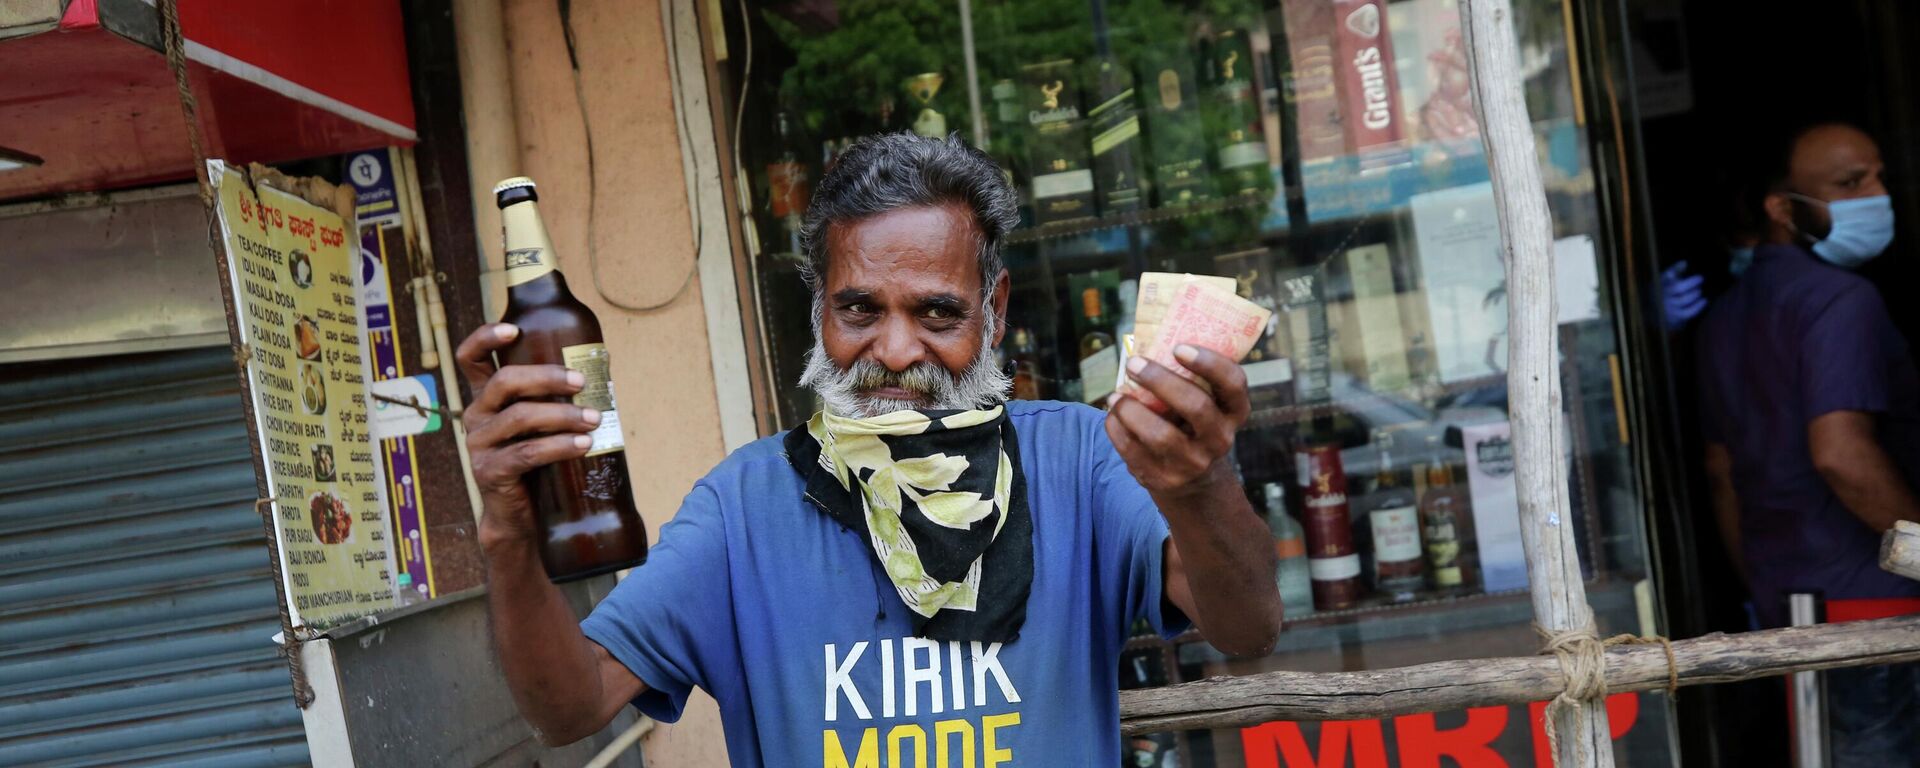 An Indian man reacts in joy after buying a bottle of liquor from an outlet during a lockdown to curb the spread of new coronavirus, in Bangalore, India, Wednesday, May 6, 2020 - Sputnik International, 1920, 07.10.2022